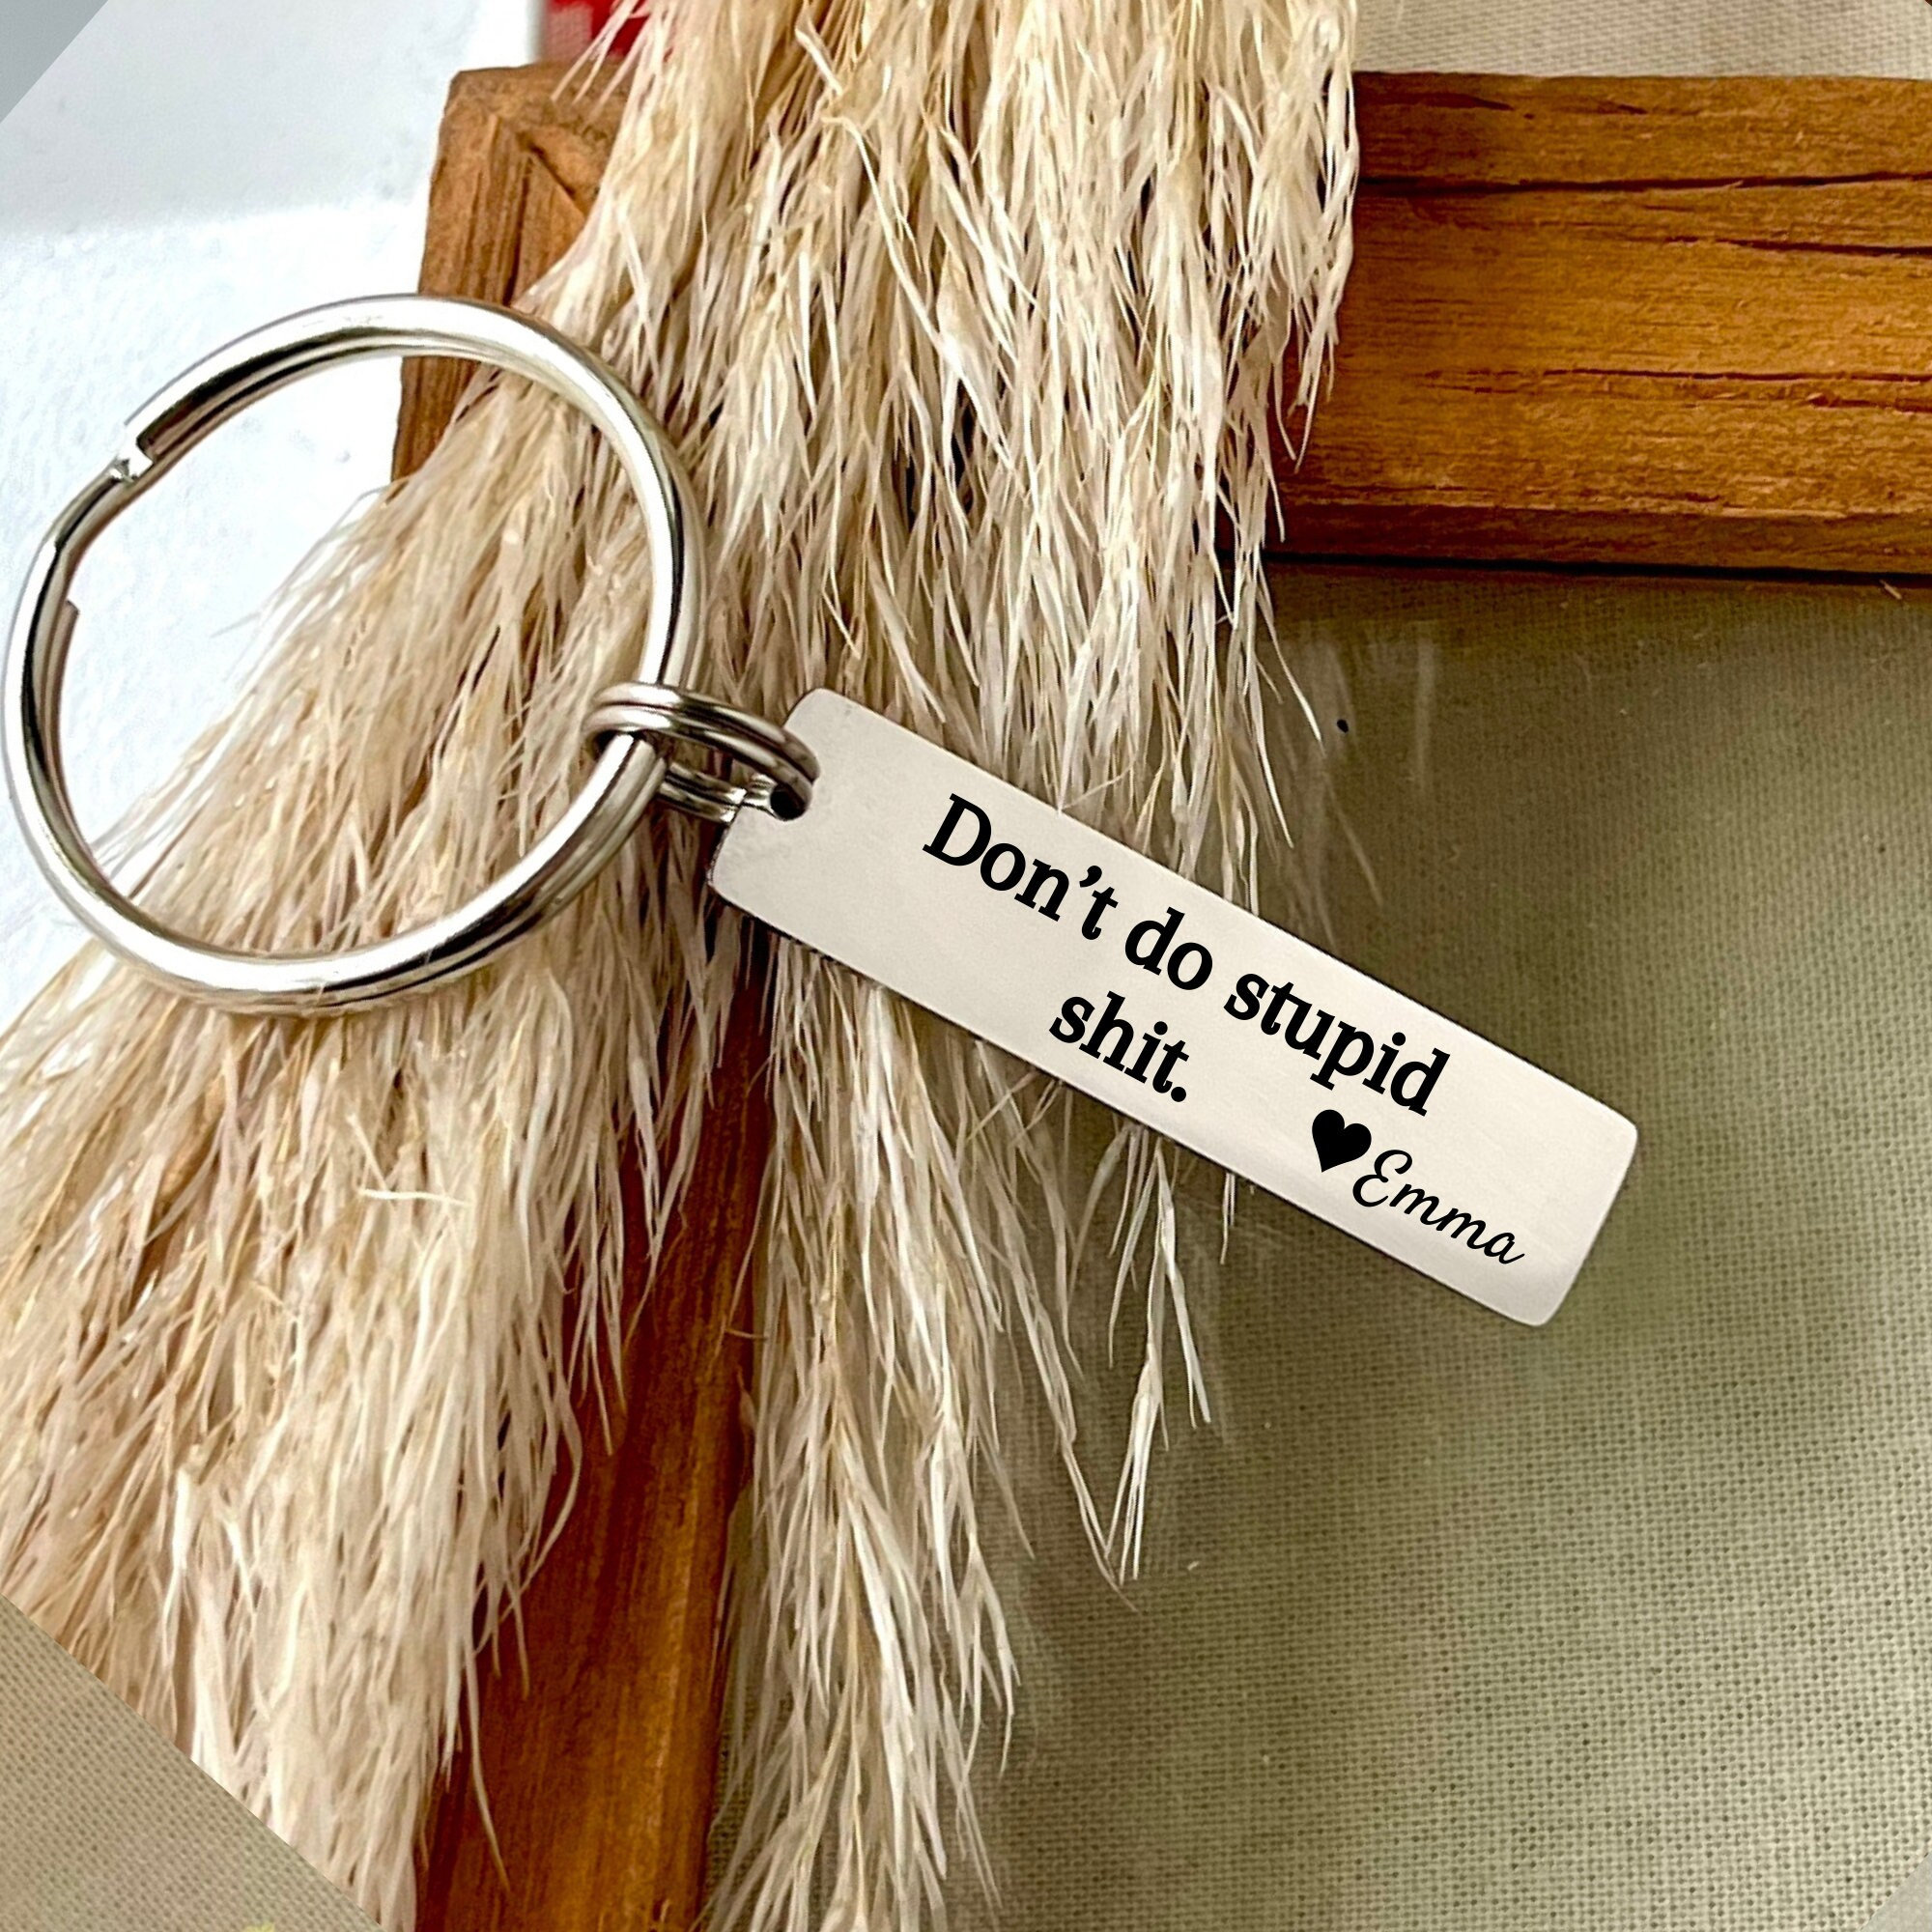 Don't Do Stupid Shit - Dad Keychain  Dragonfly and Wolf Hand Stamped  Designs